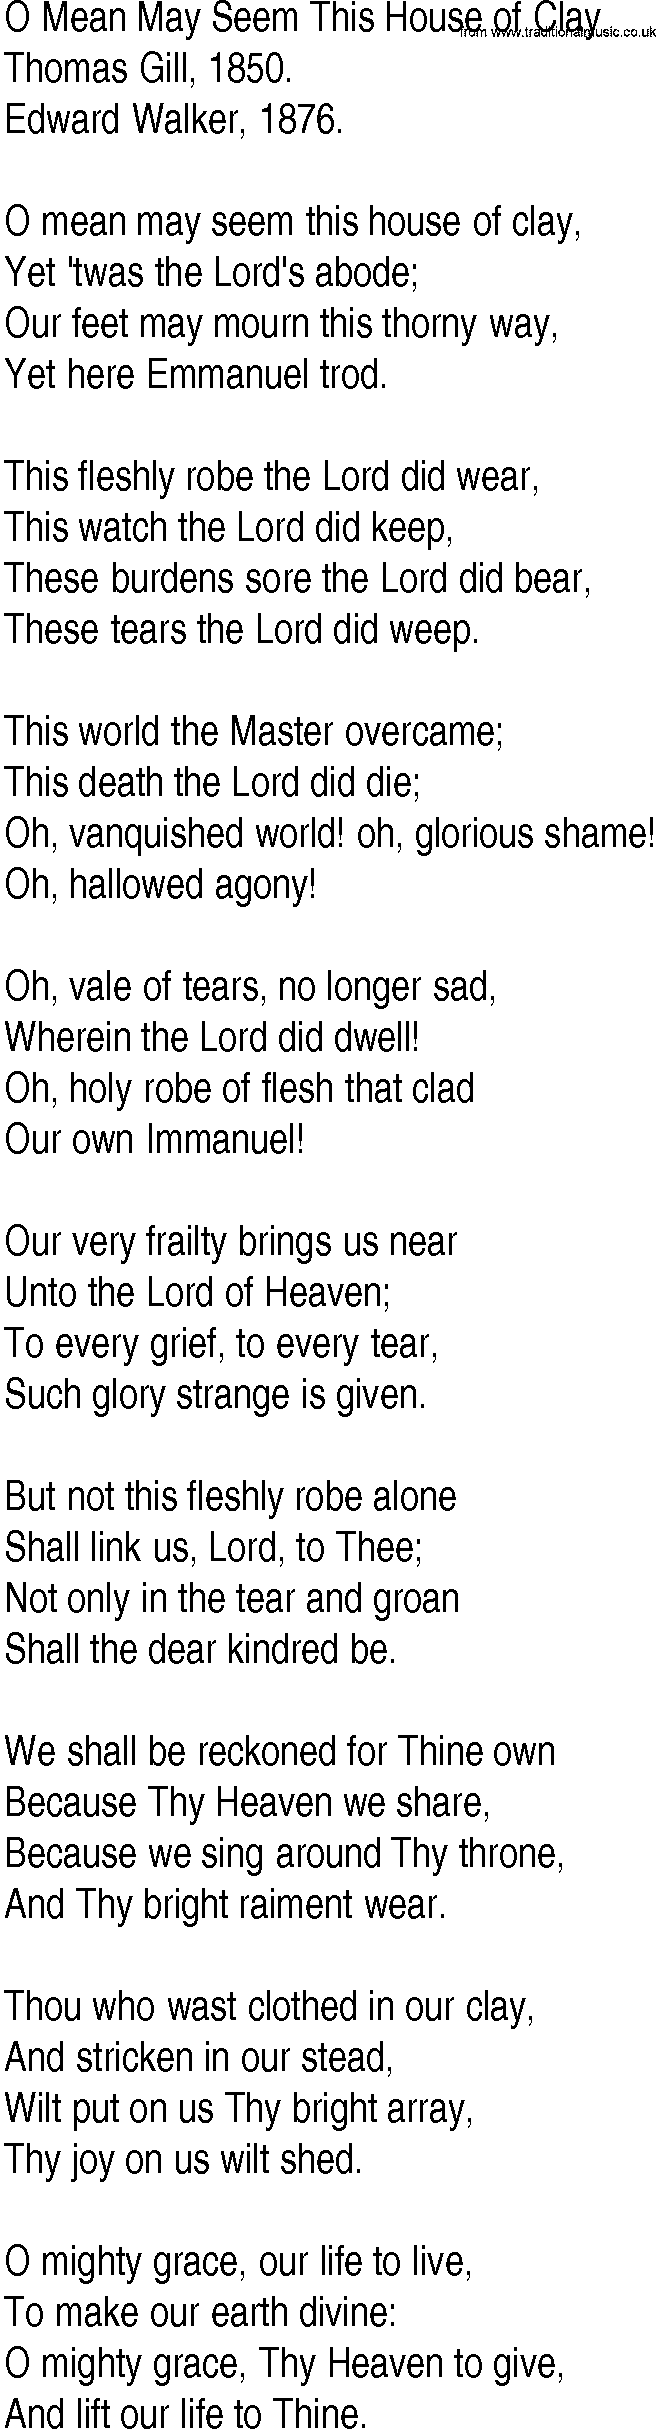 Hymn and Gospel Song: O Mean May Seem This House of Clay by Thomas Gill lyrics